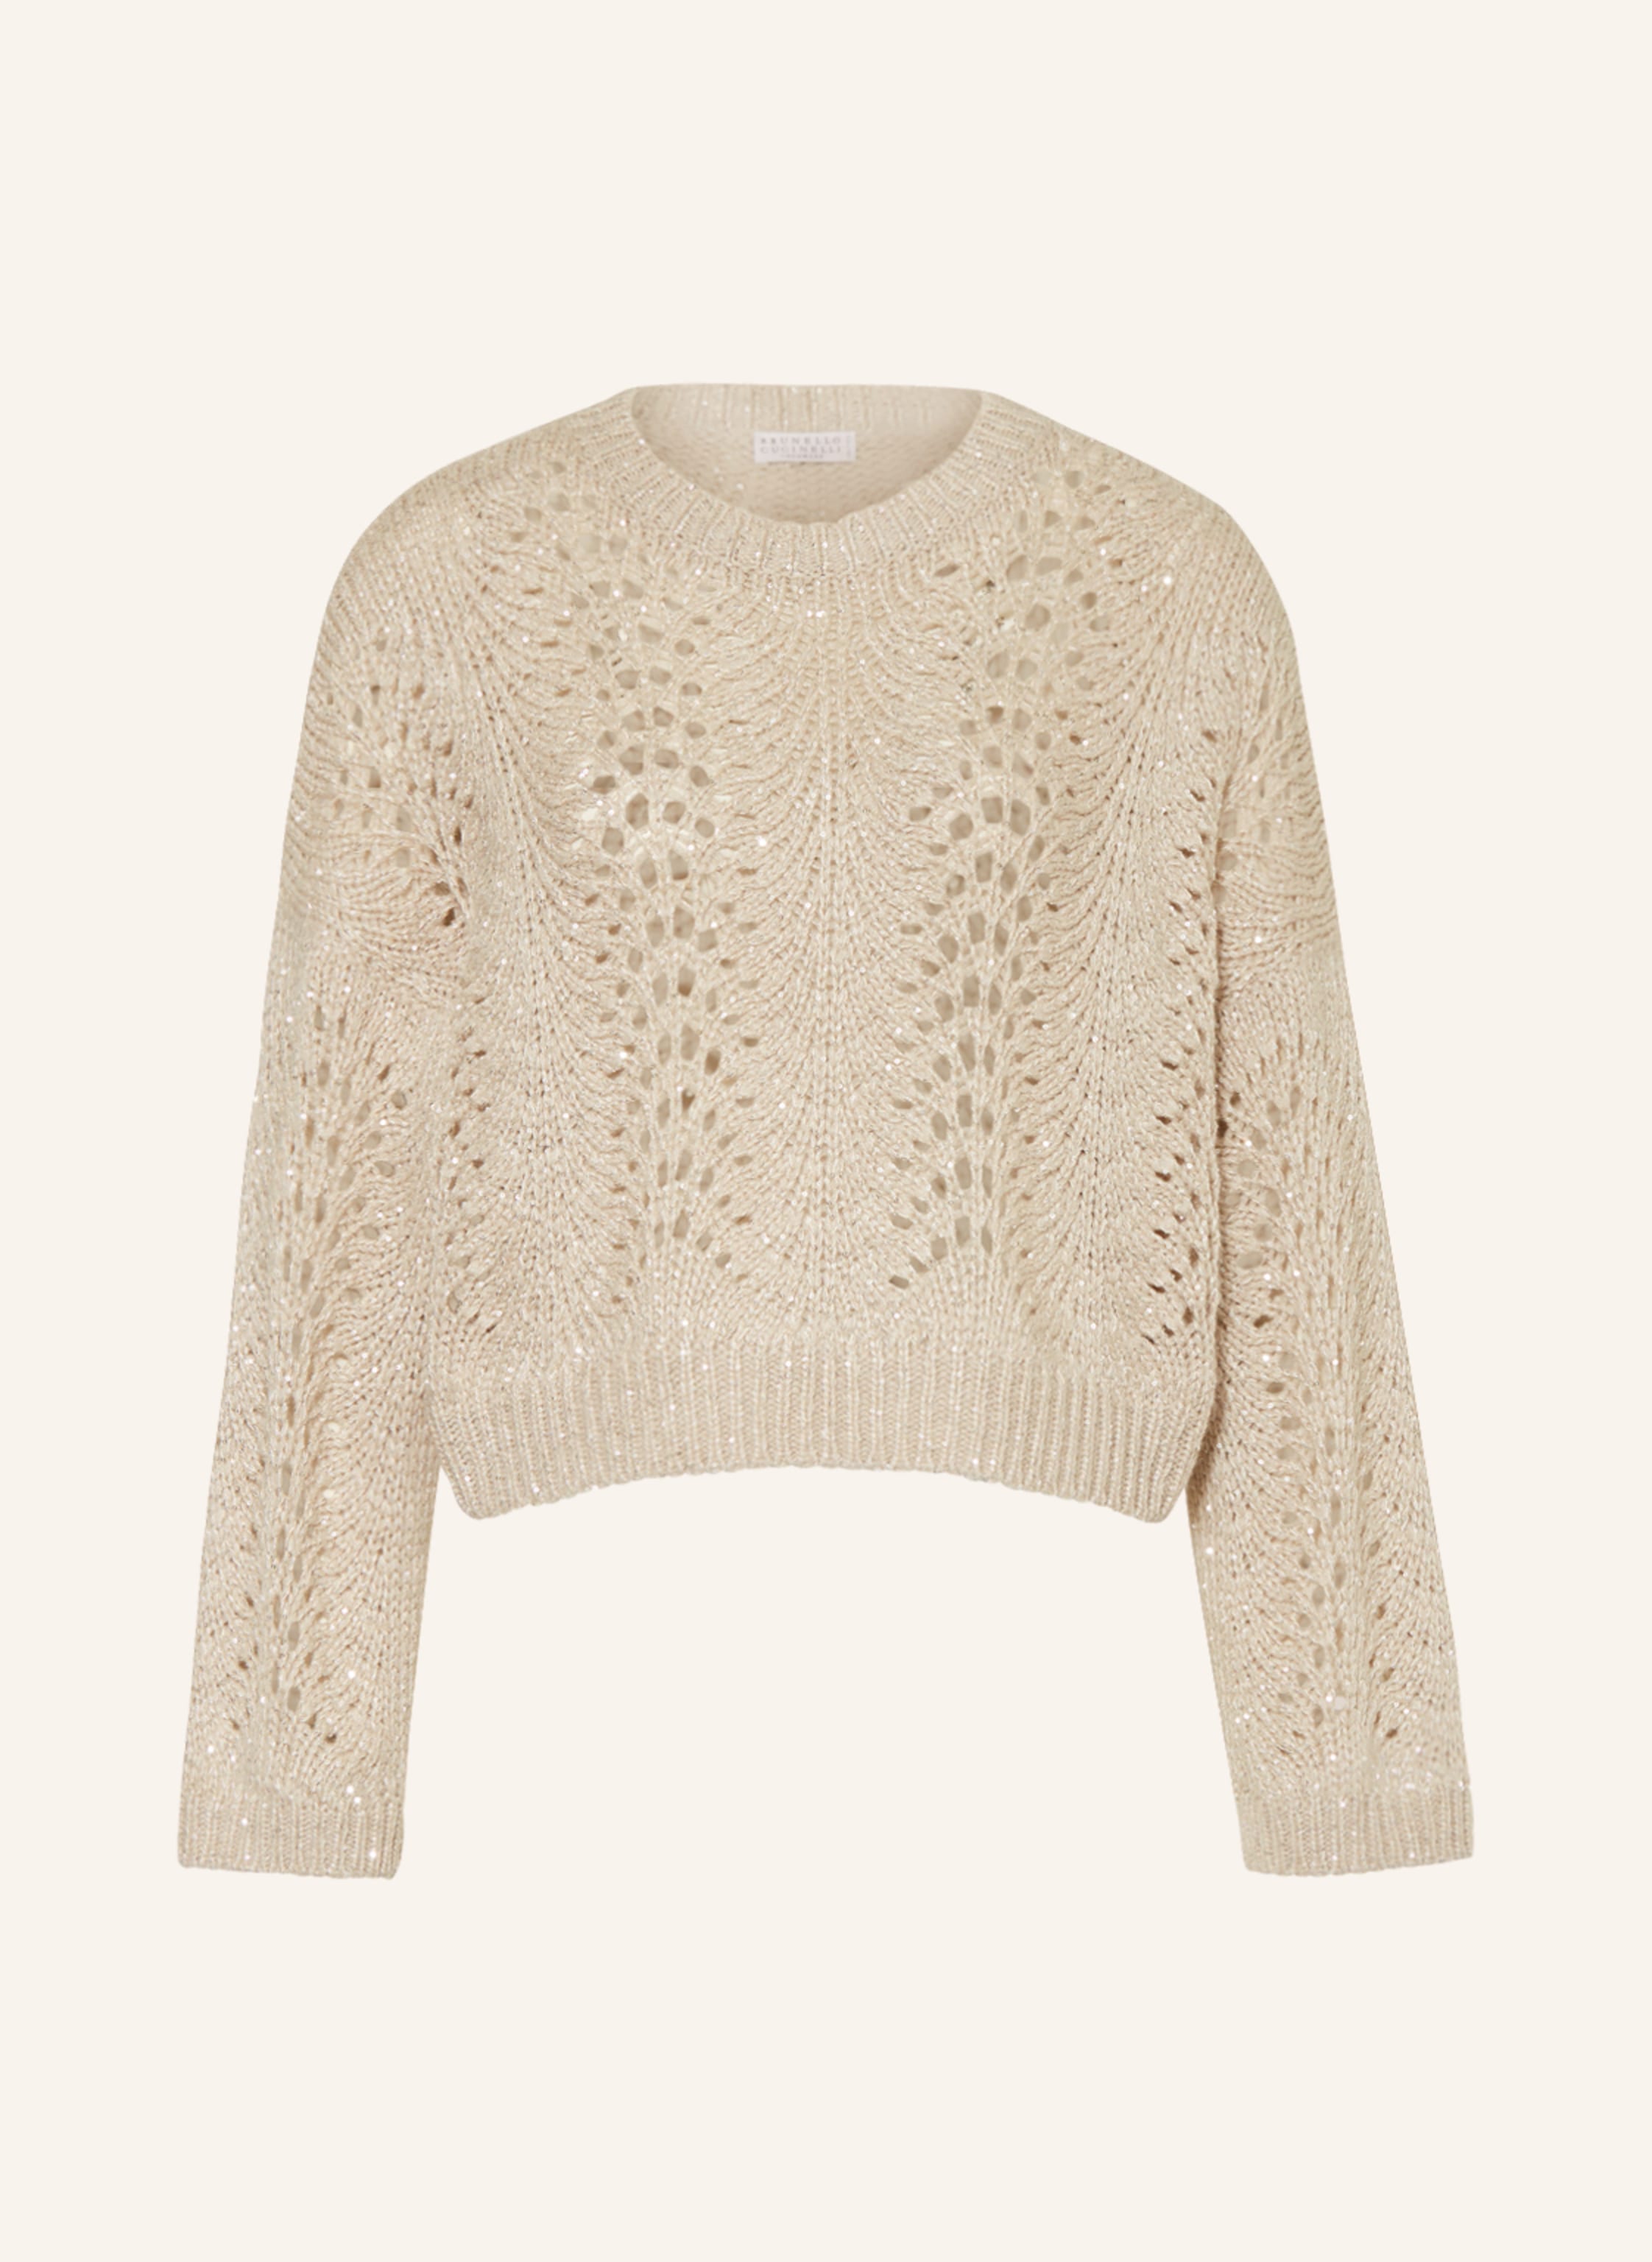 BRUNELLO CUCINELLI Sweater with cashmere and sequins in cream